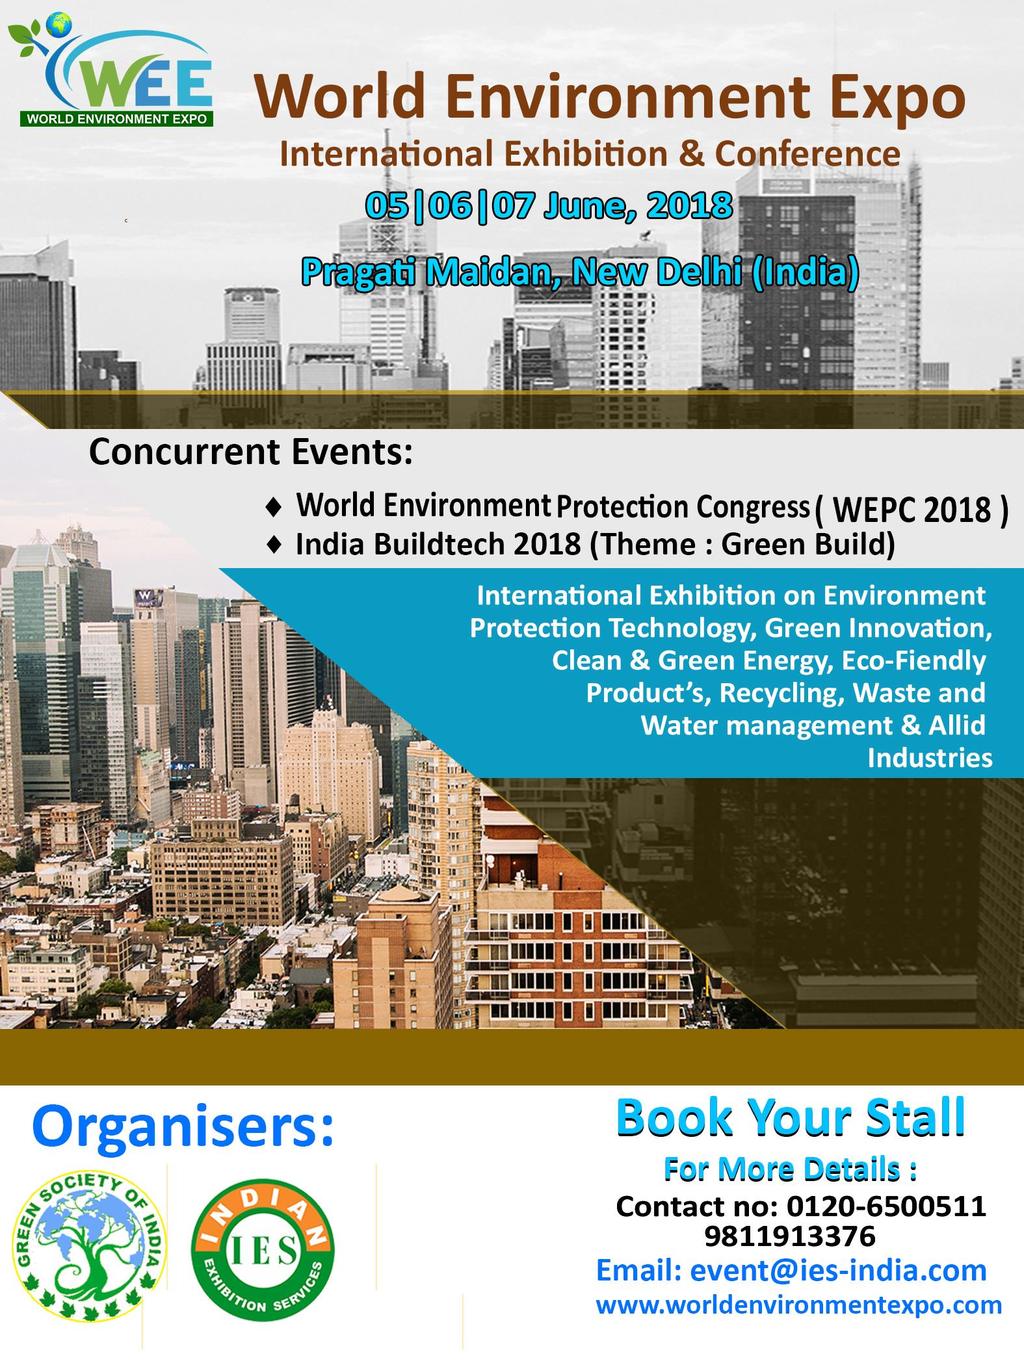 The main aim of the expo is awareness for the environment, use of technology for environment protection, research & development for new environmental protection technology and provide business